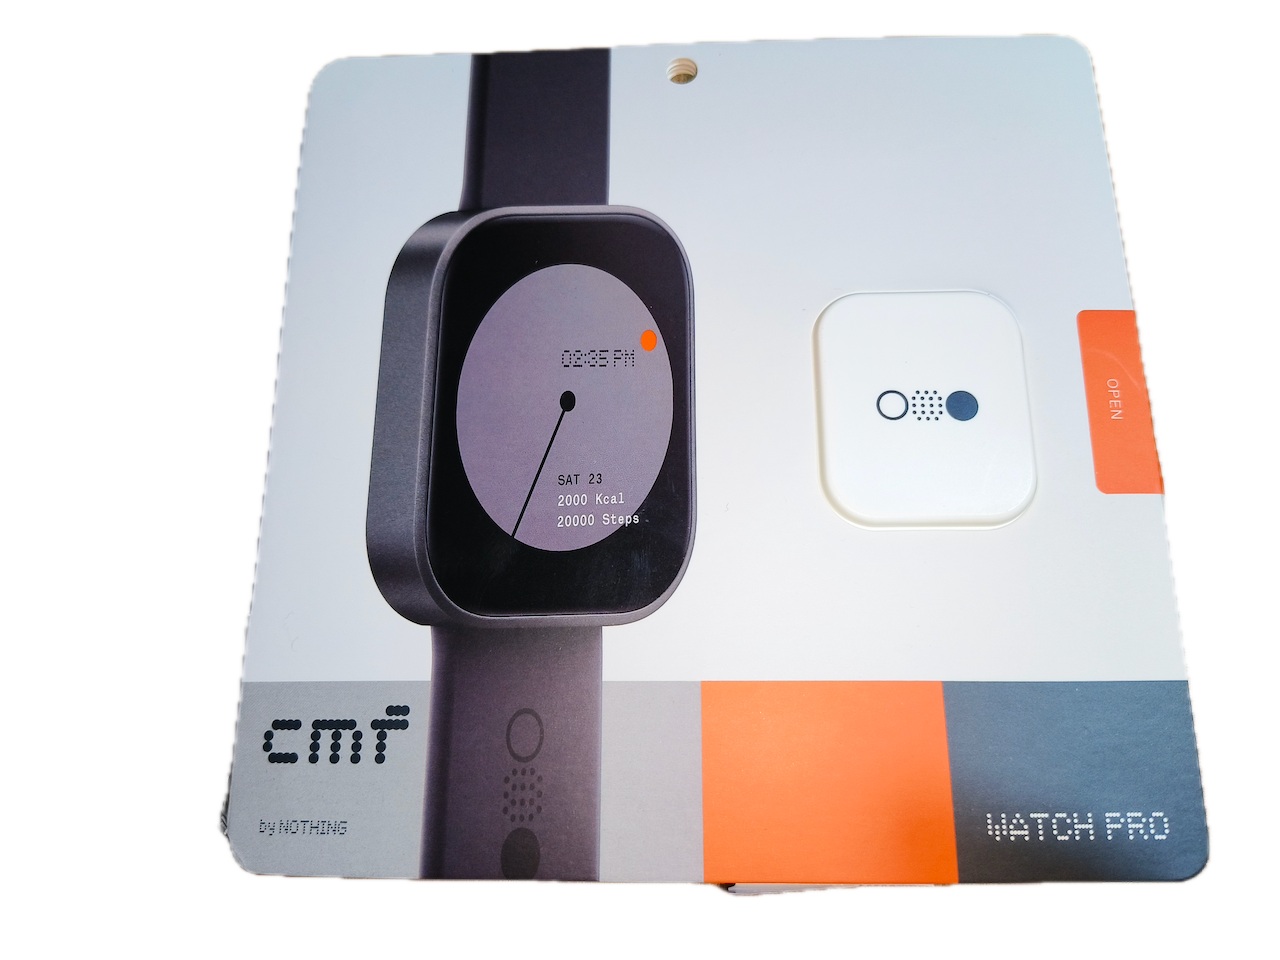 Nothing CMF Watch Pro first look